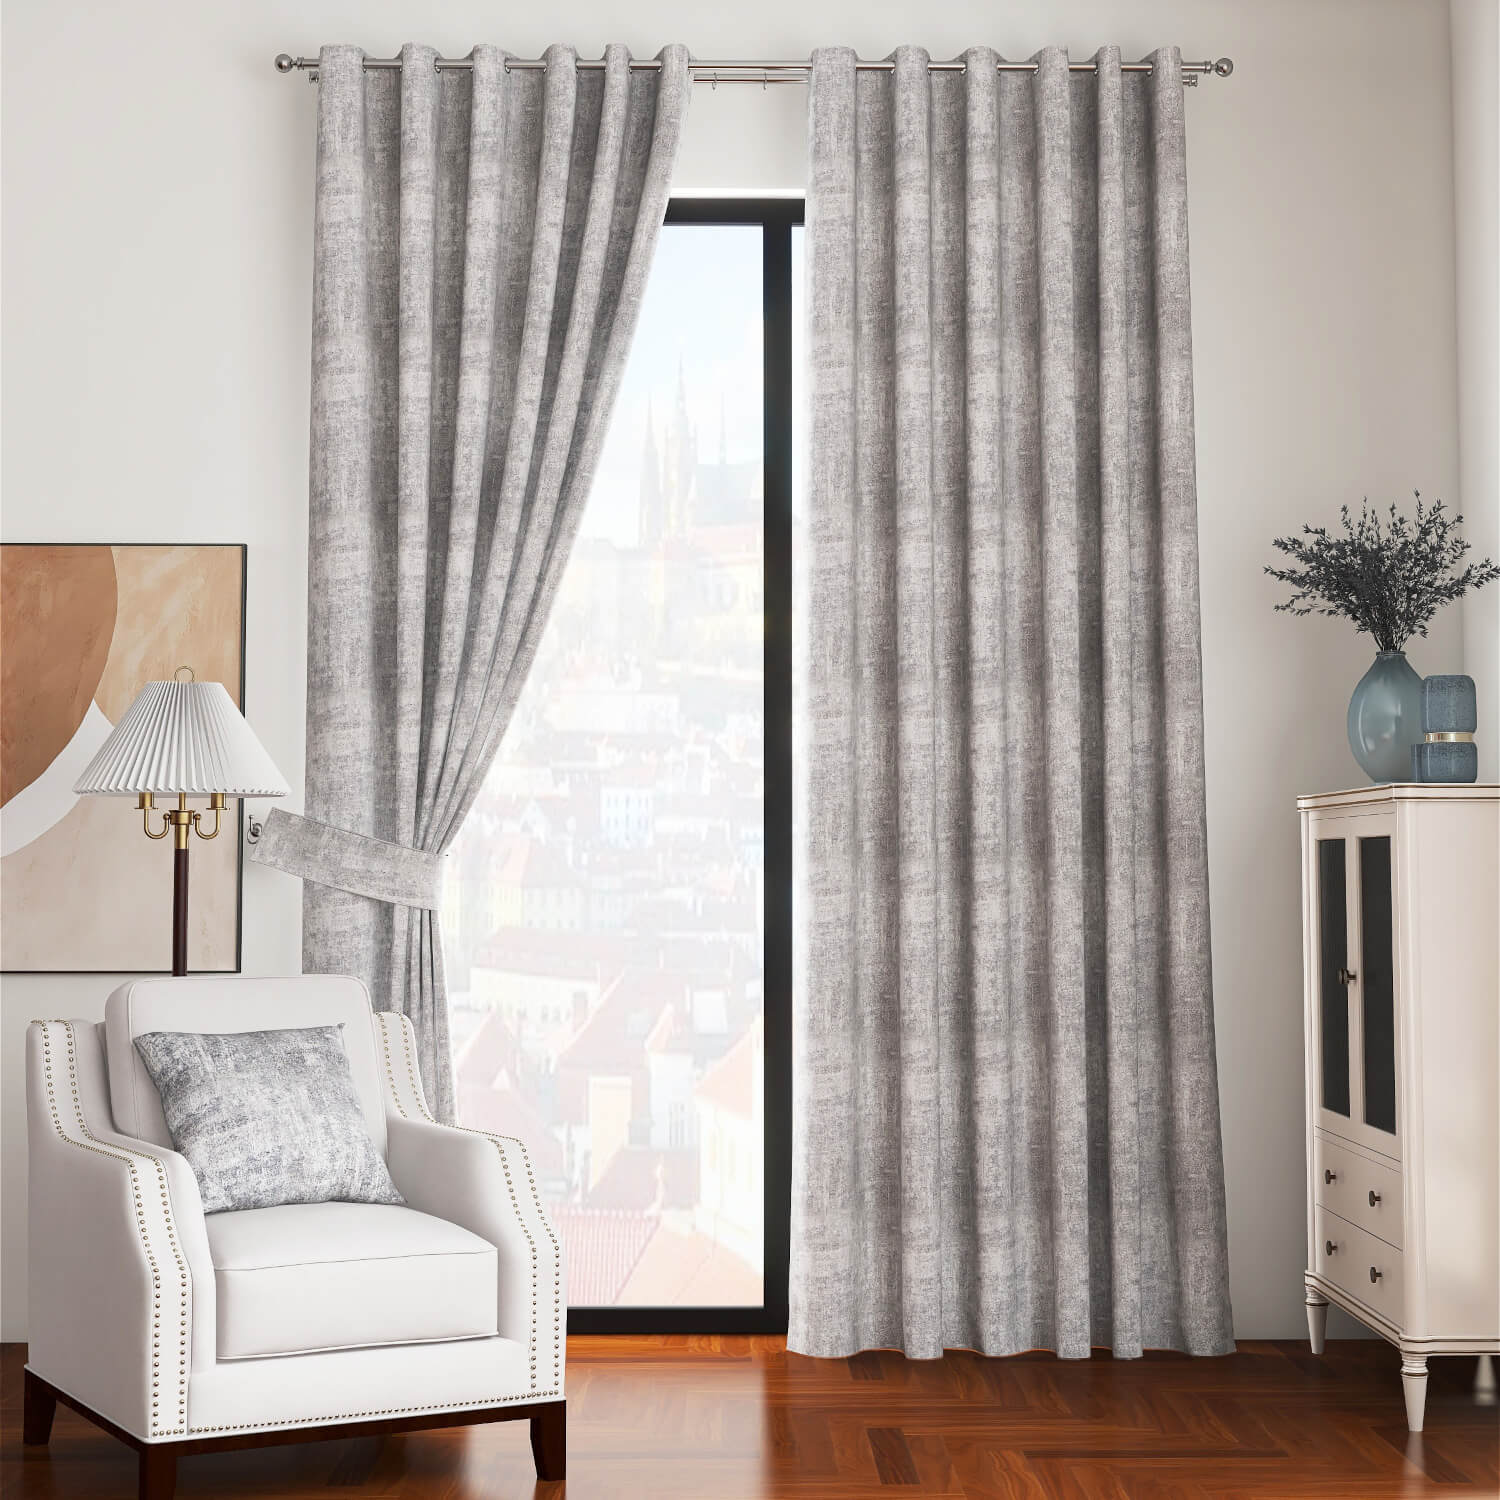 The Home Living Room Fiesta Ring Top Curtains - Silver 1 Shaws Department Stores